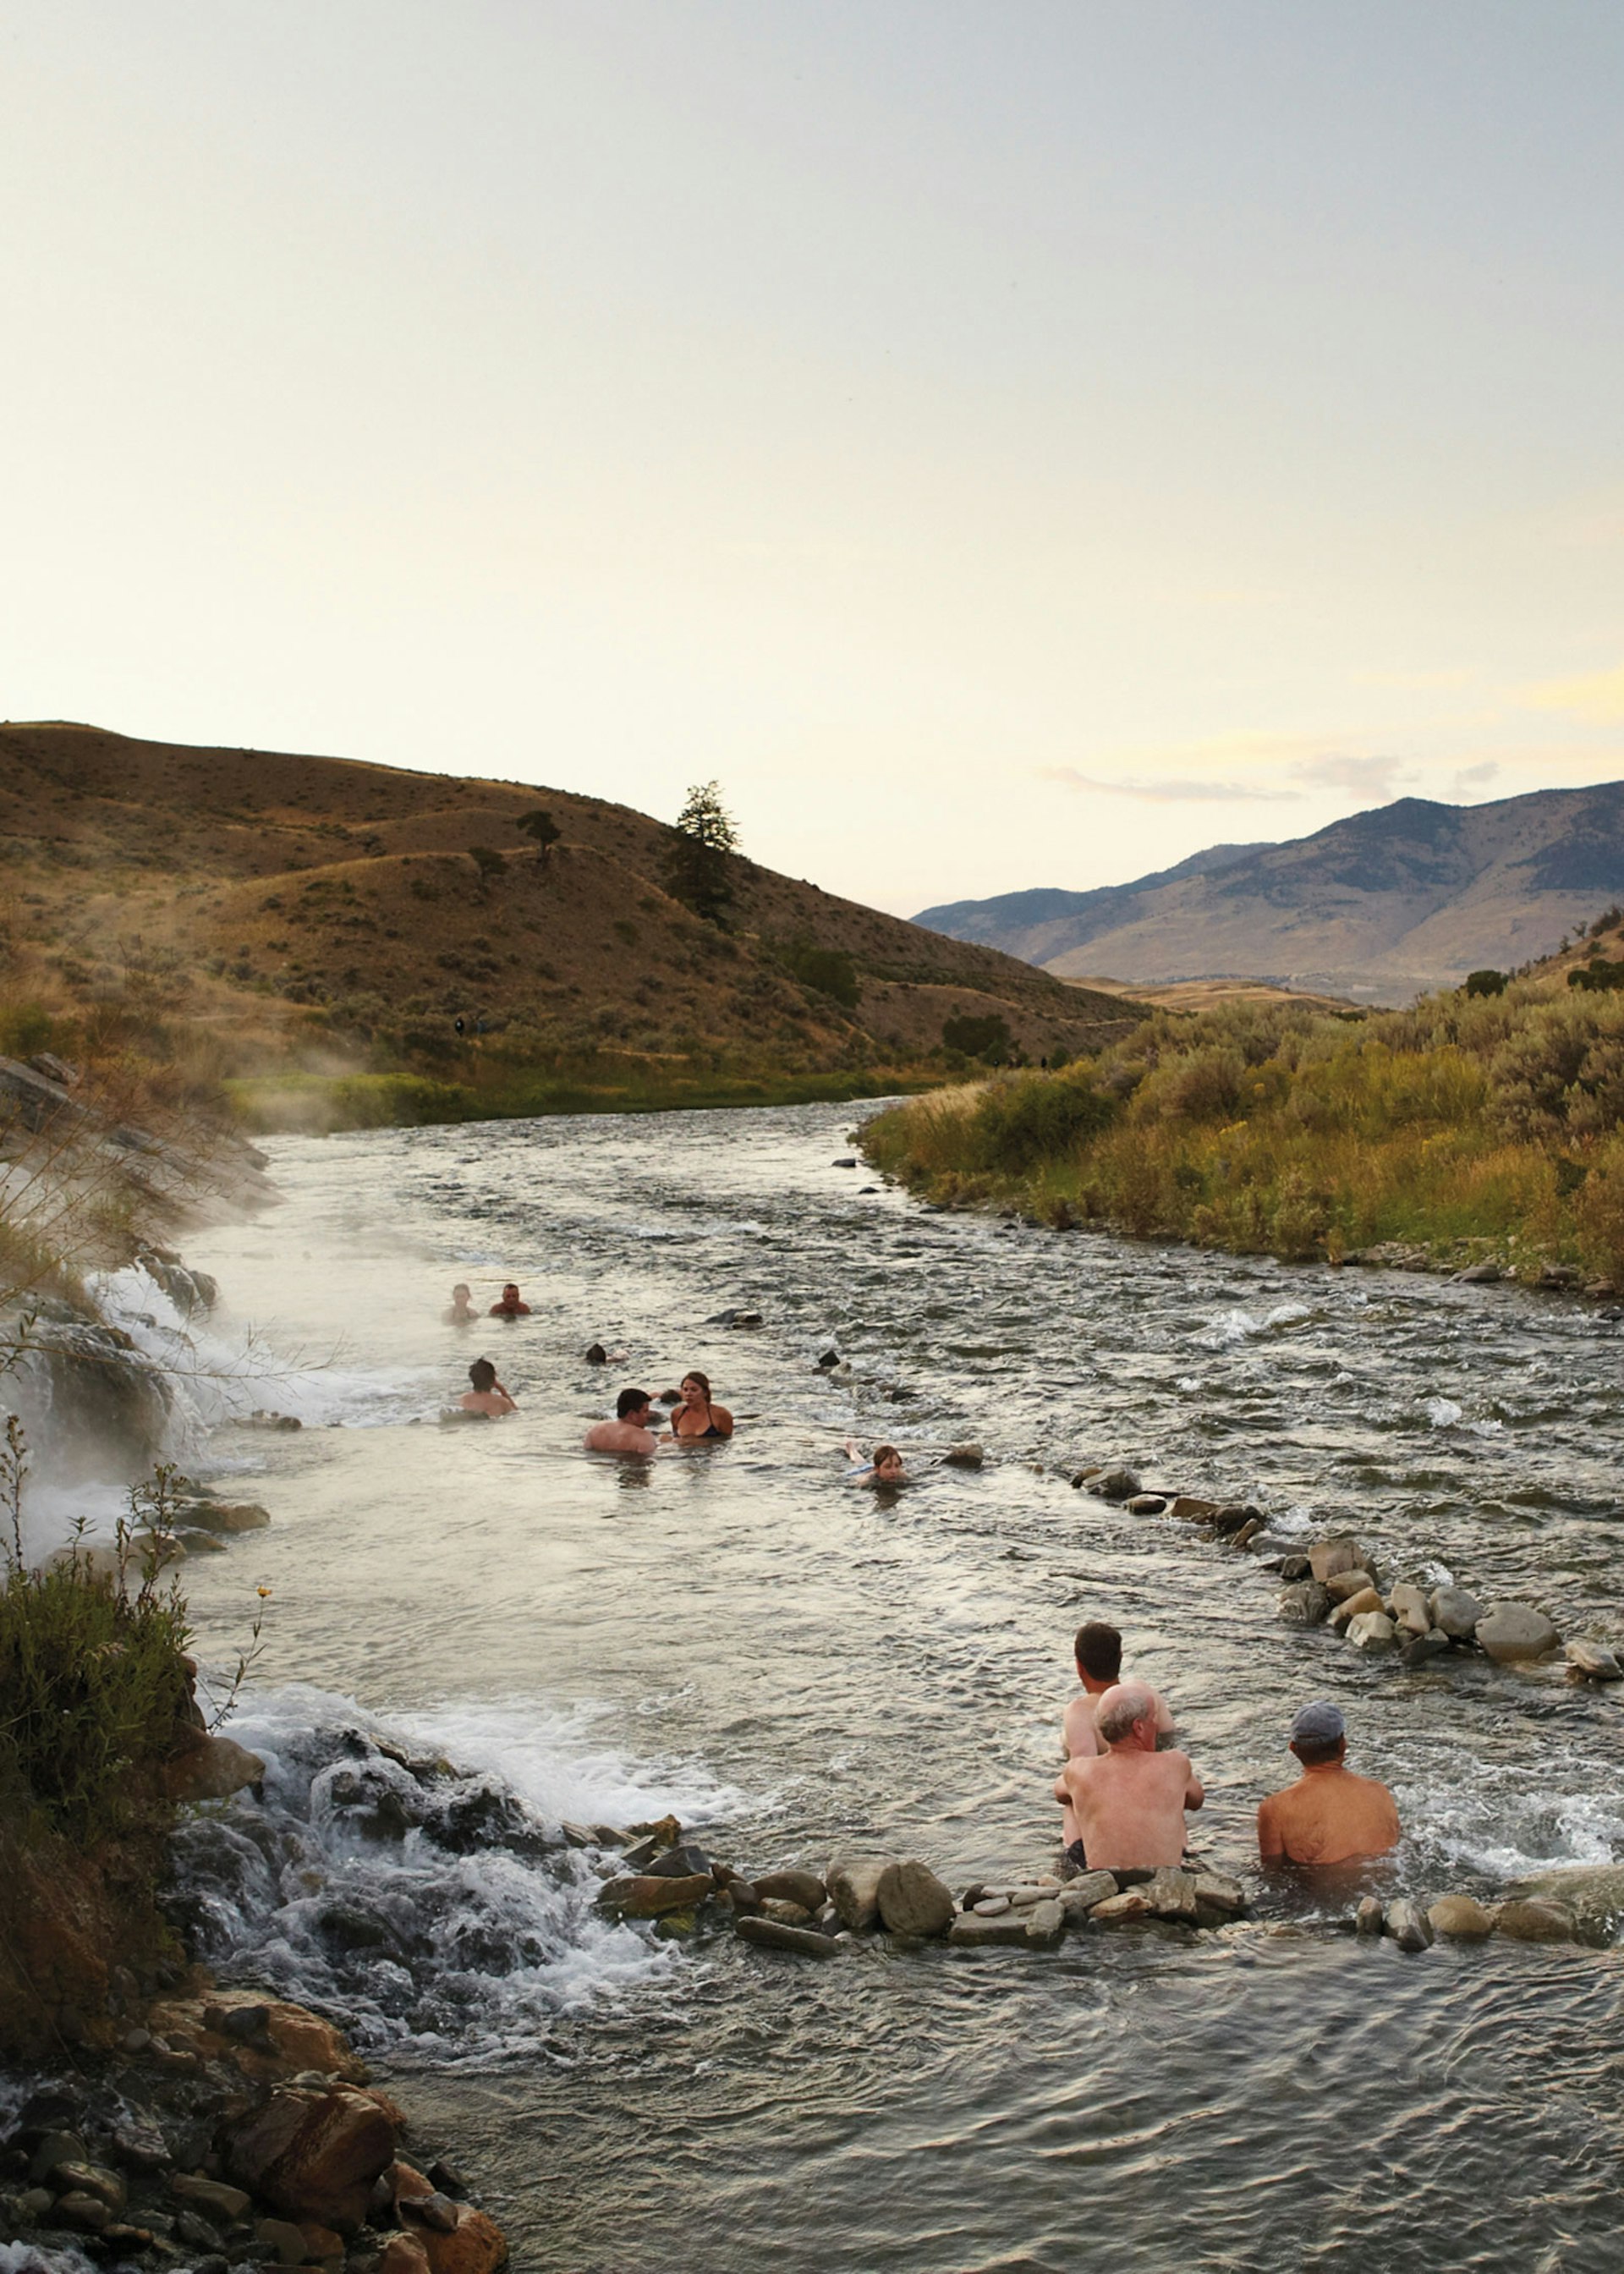 Bathers relaxing in Boiling River, Yellowstone National Park © Matt Munro / Lonely Planet